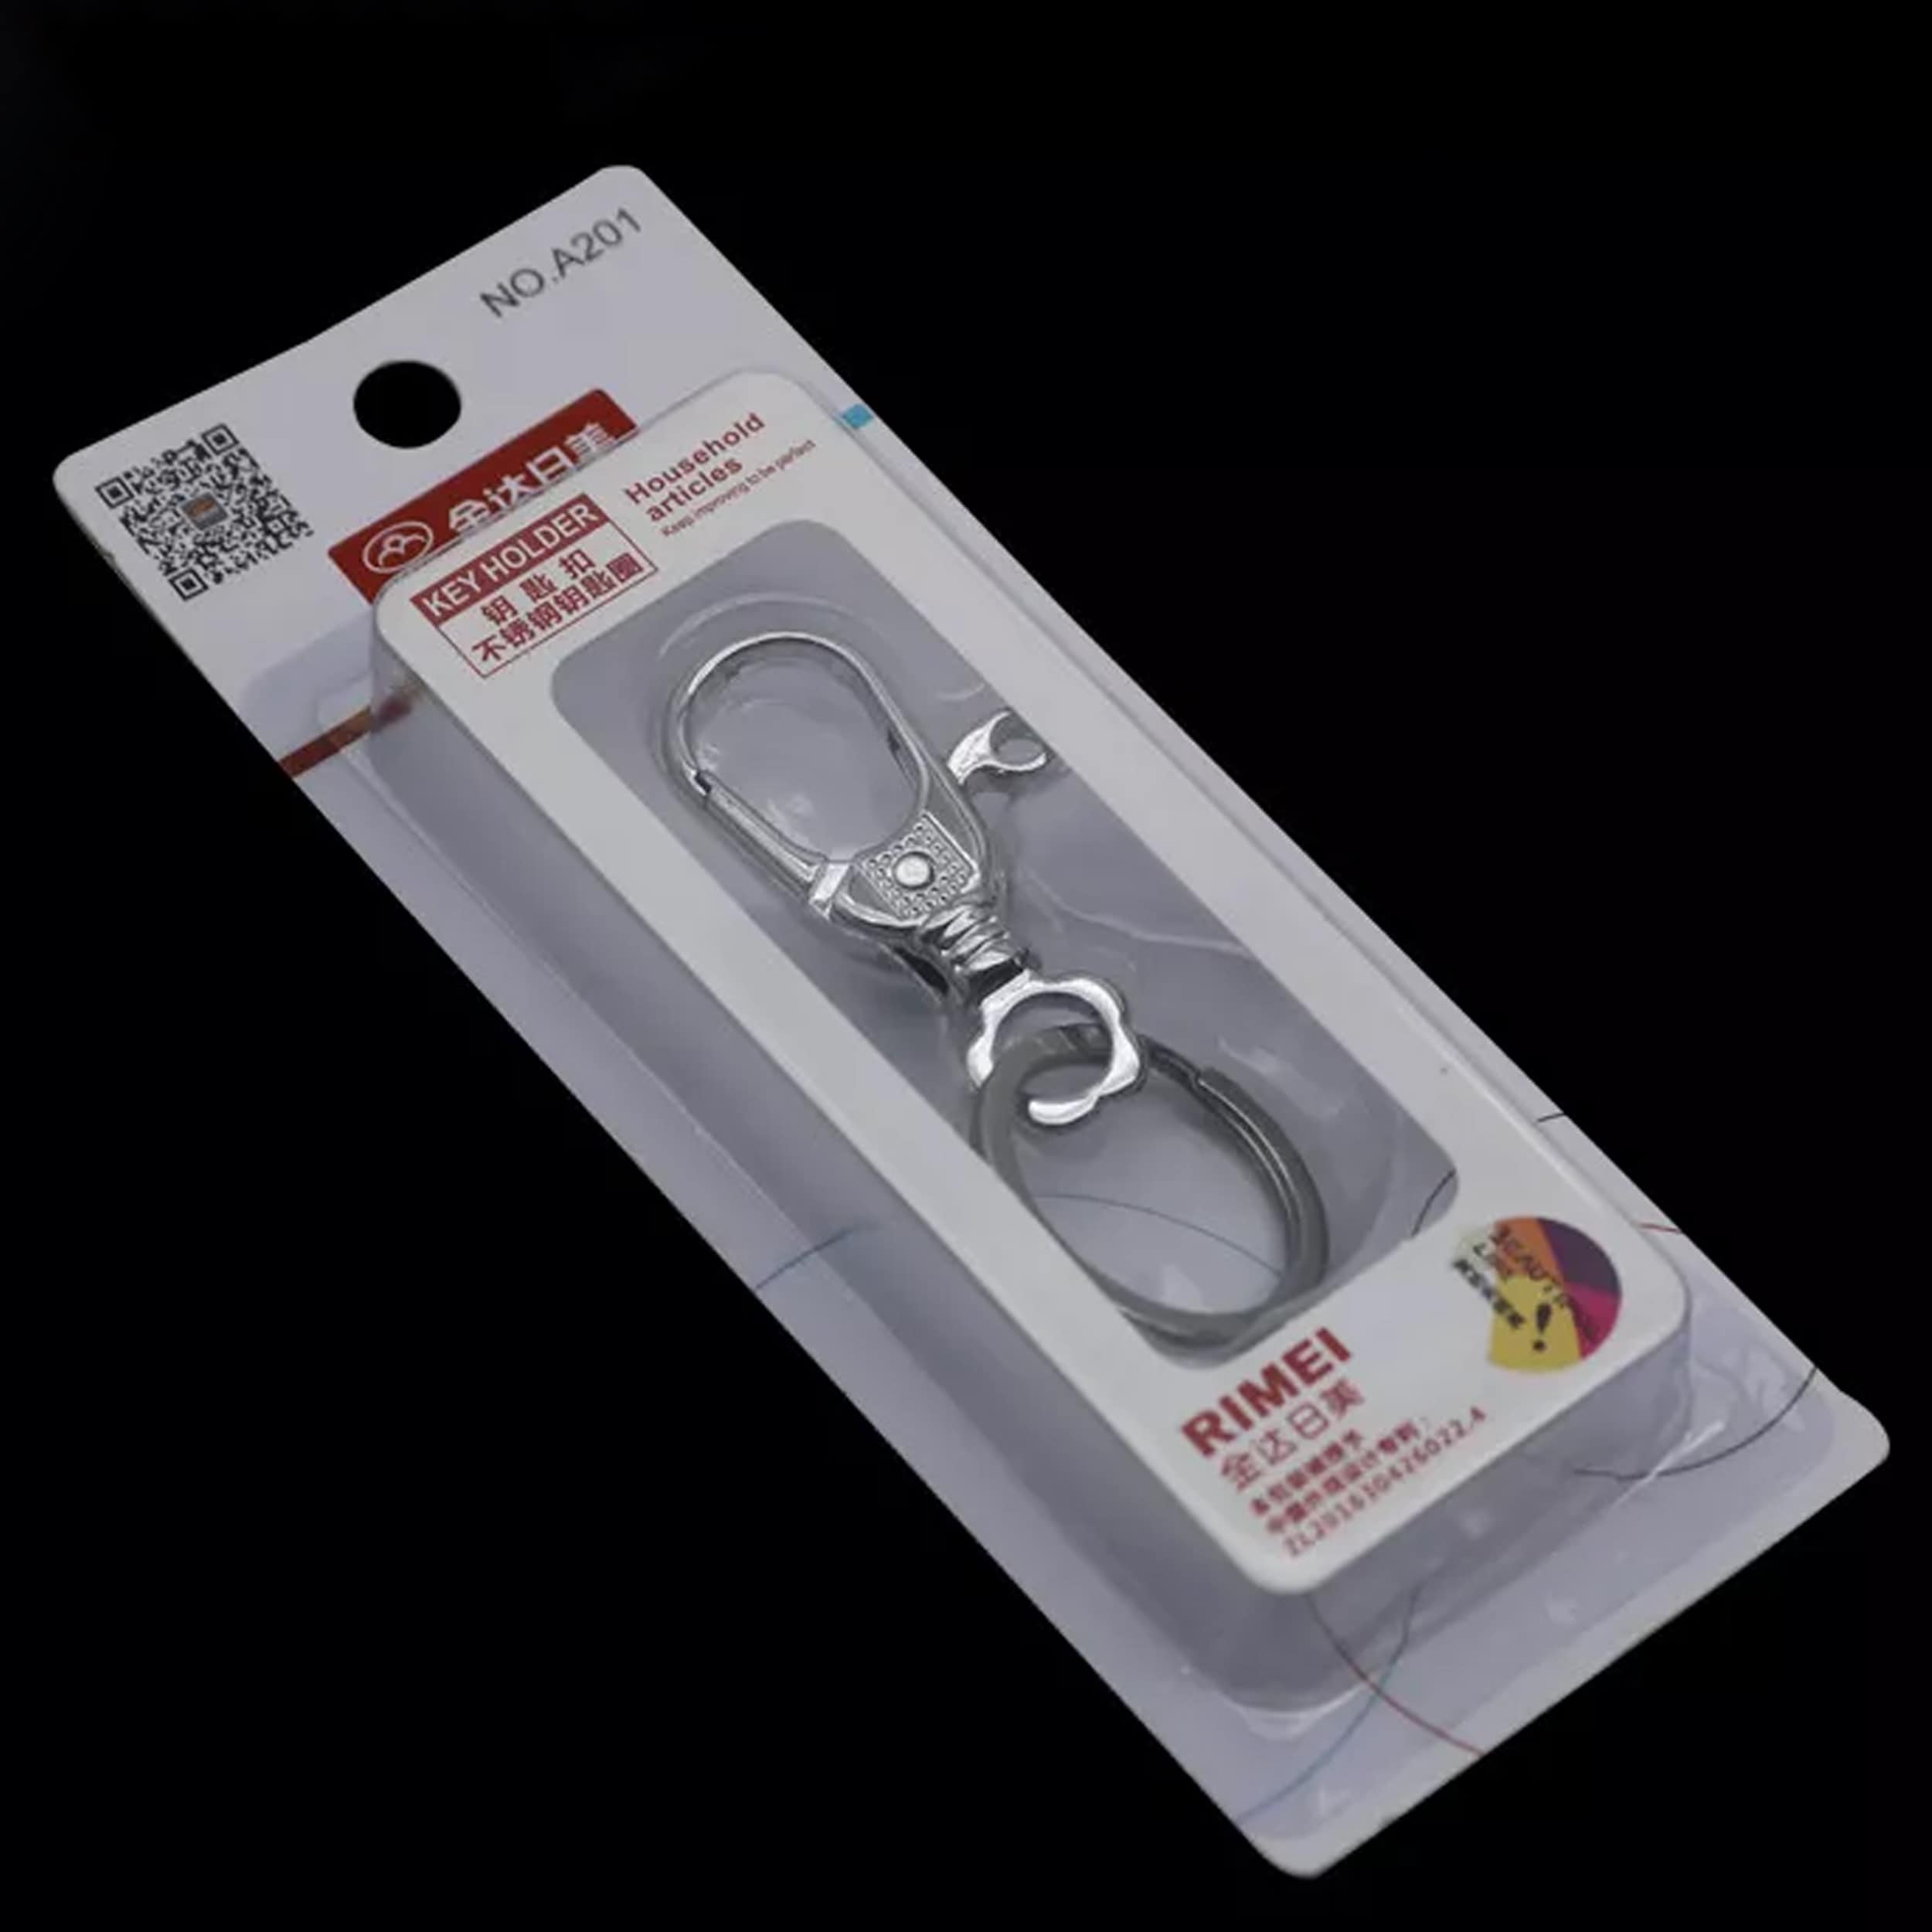 Upgrade Your Key Game with Our Wholesale New Stainless-Steel Keychain - Durable and Stylish